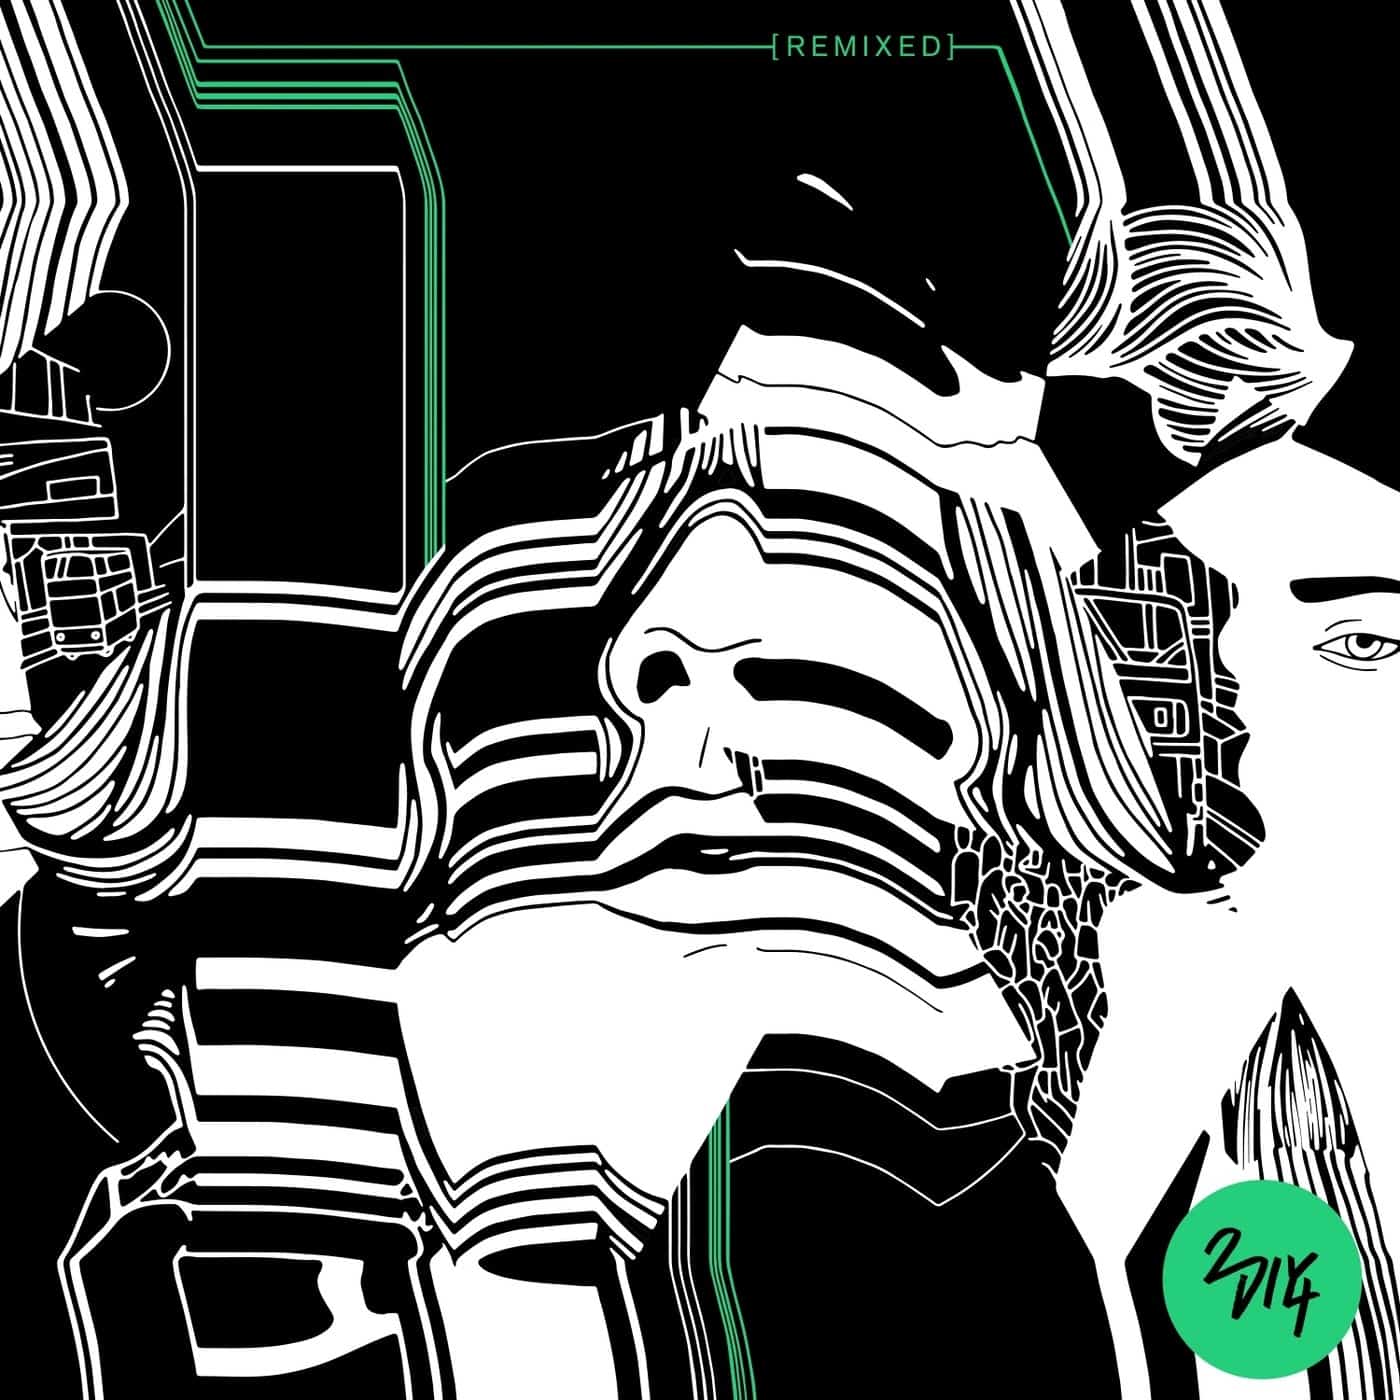 Release Cover: VA - 2DIY4 Remixed - Part 1 on Electrobuzz